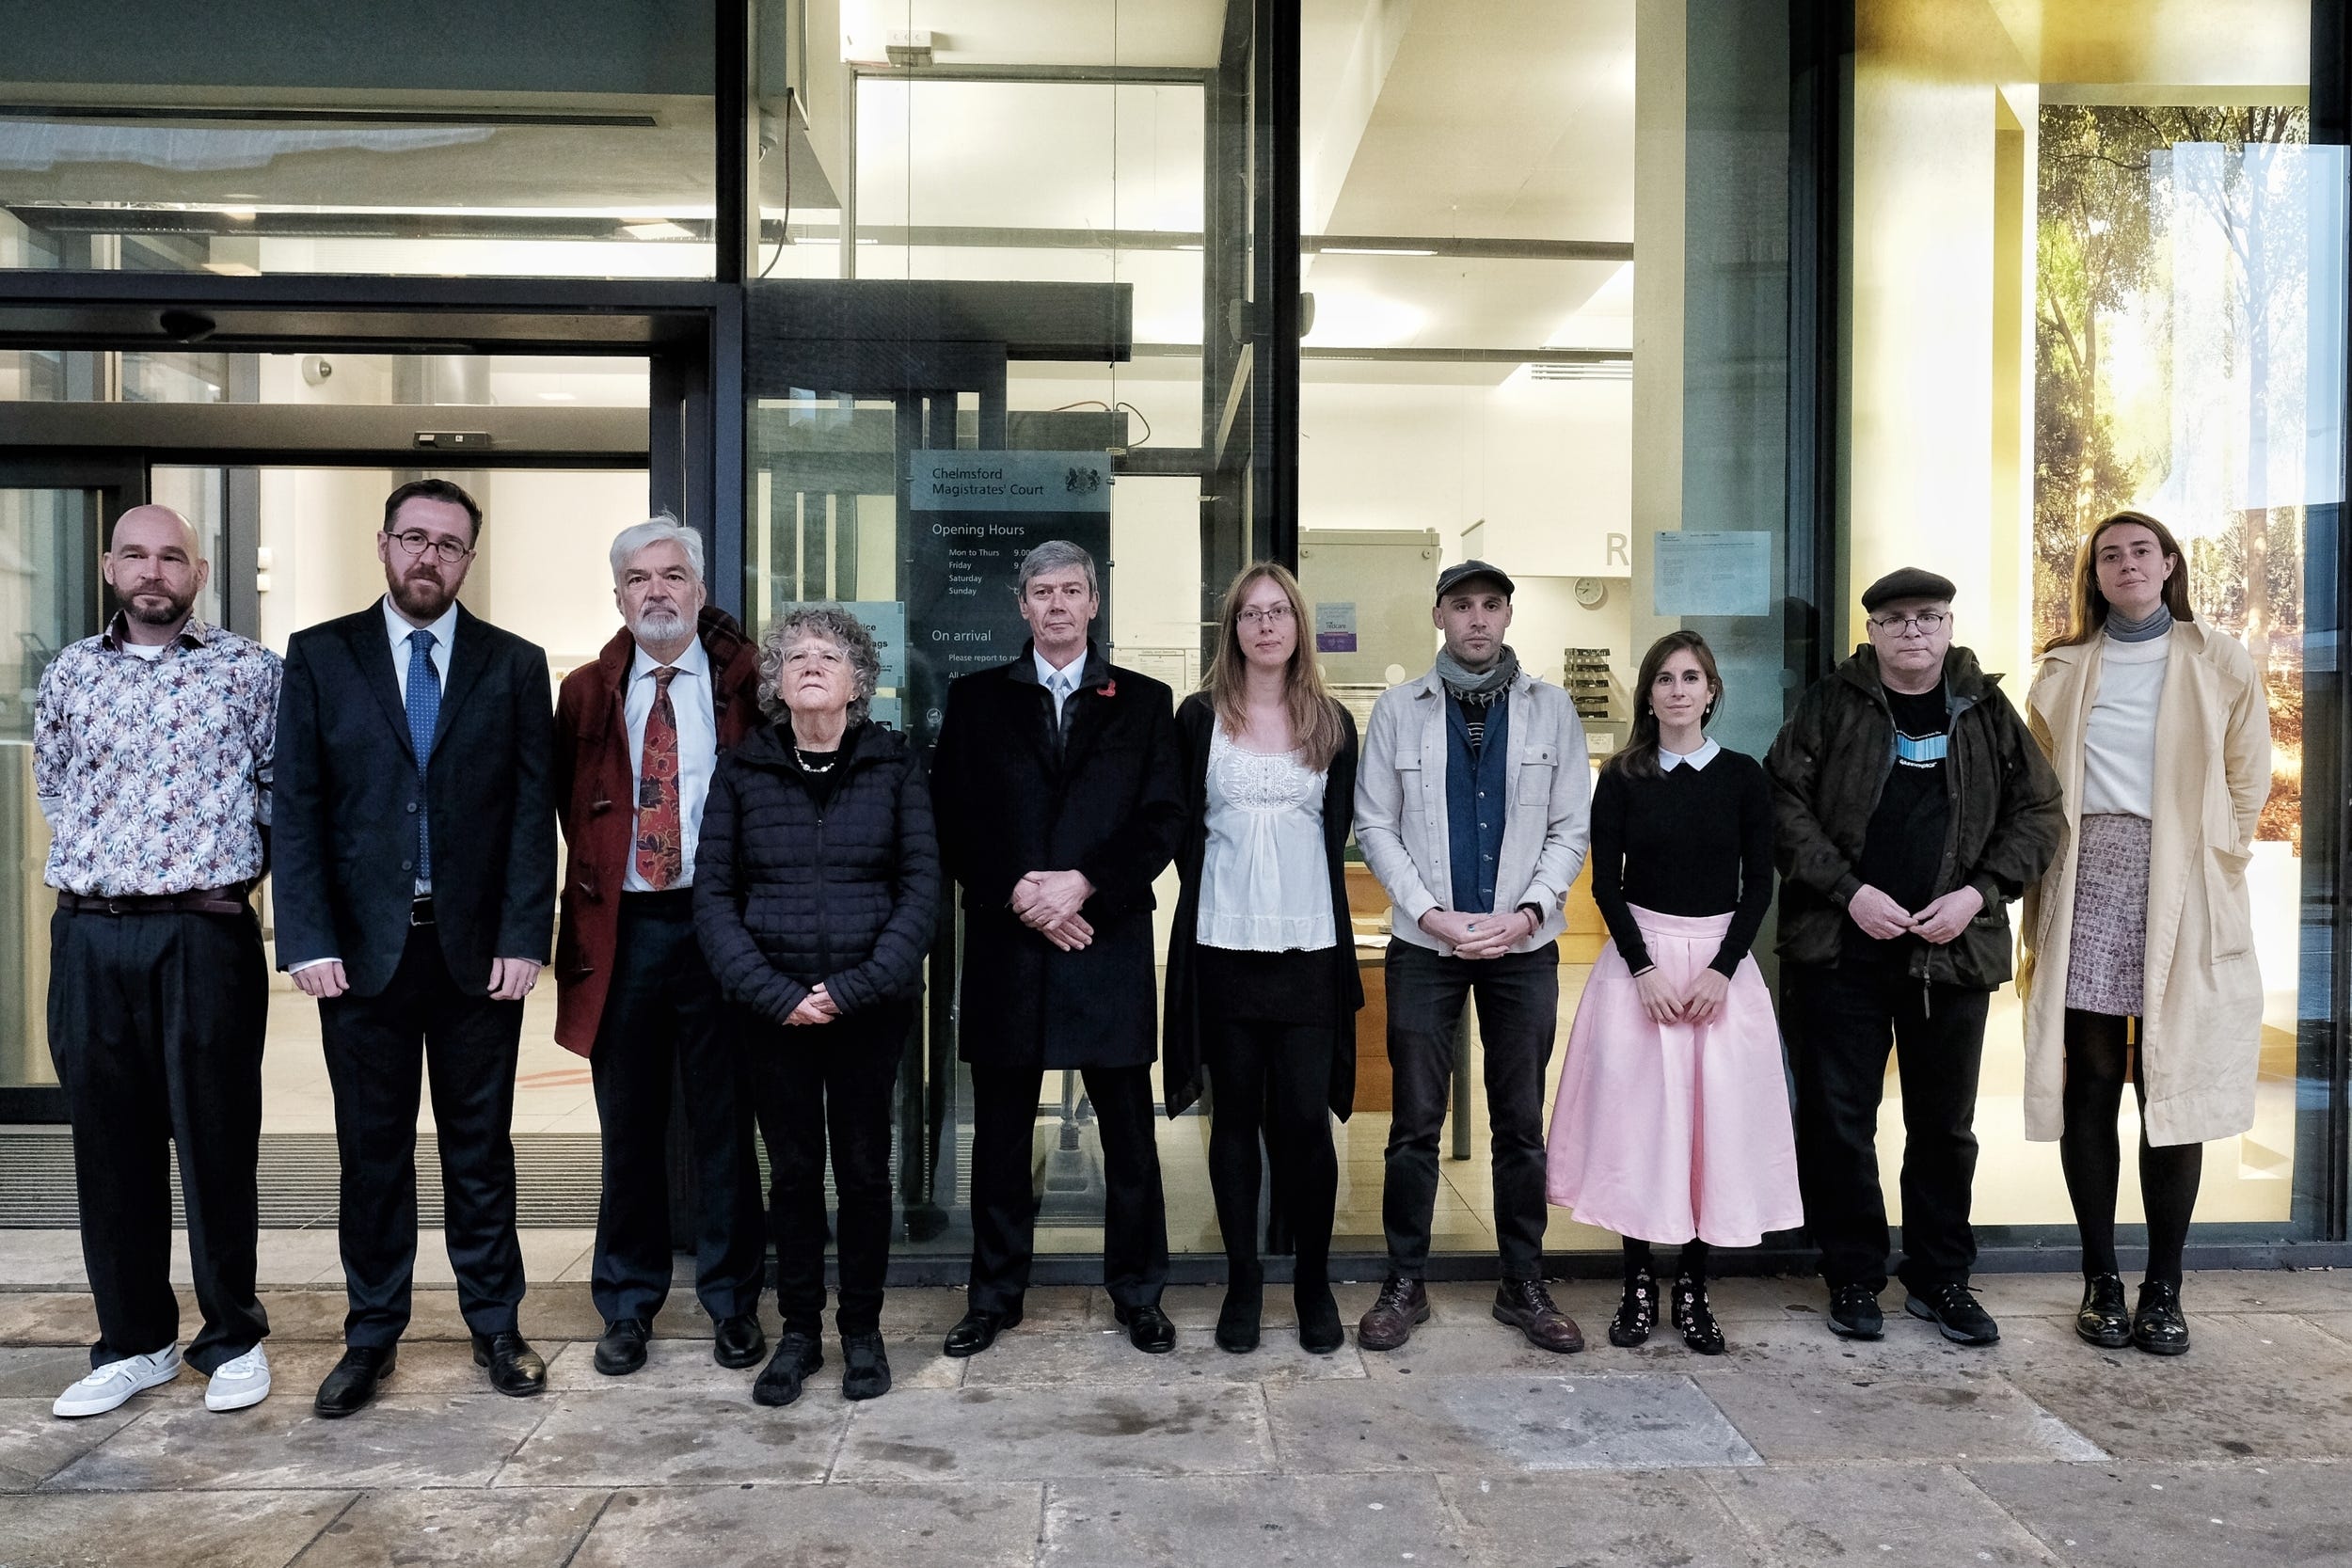 Greenpeace activists (left to right) Ben Hearne-Salter, Henry Rayner, David James, Lyndall Stein, Mike Grant, Kim Harrison, Benji Bailes, Zoe Pontida, Ian Mills and Rhiannon Wood outside Chelmsford Magistrates’ Court (Angela Christofilou/Greenpeace/PA)